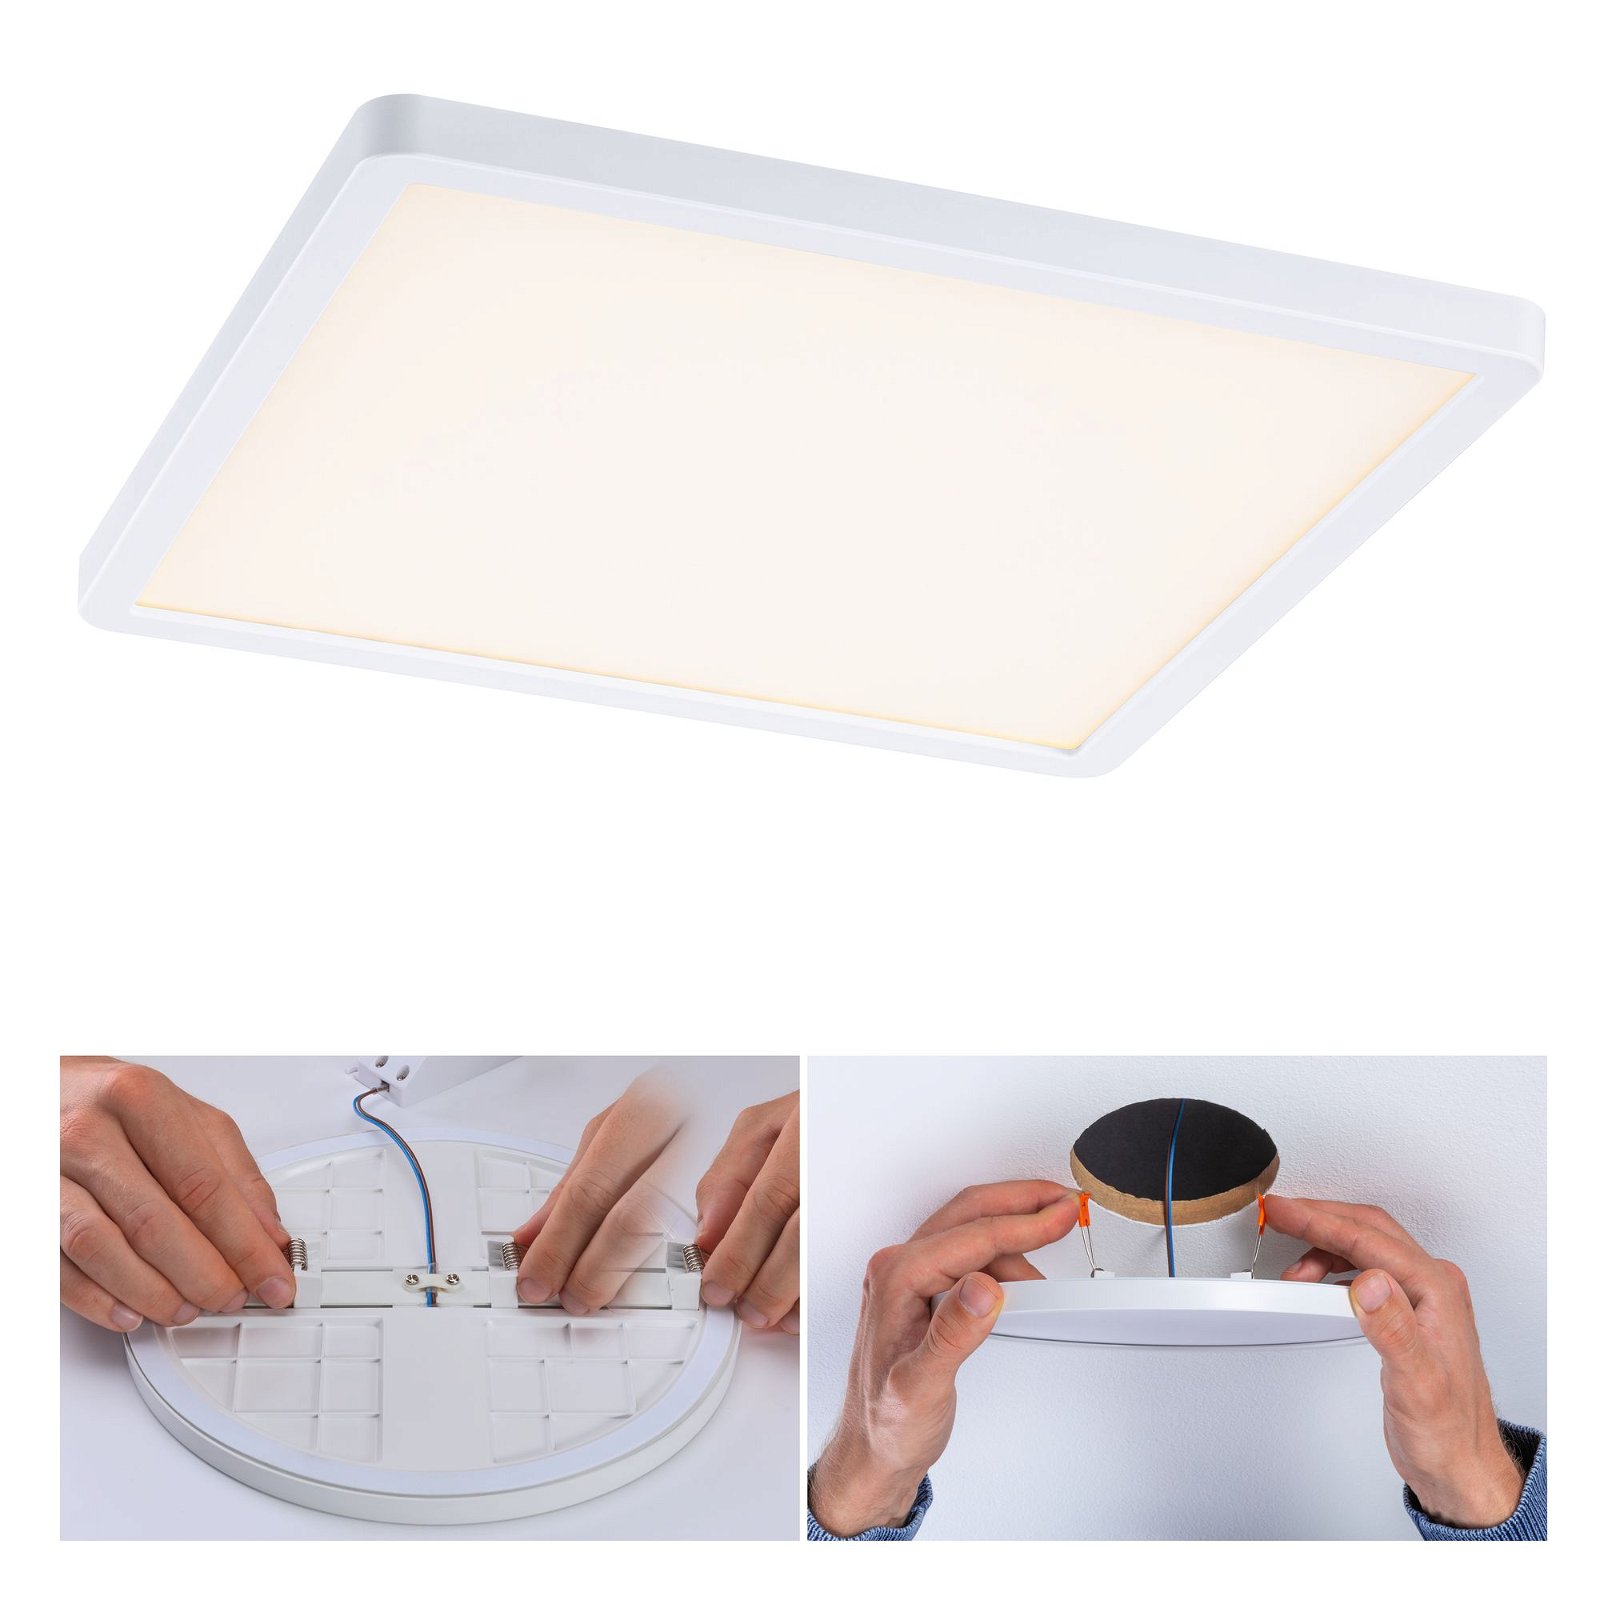 VariFit LED Recessed panel 3-Step-Dim Areo IP44 square 230x230mm 16W 1400lm 3000K White dimmable